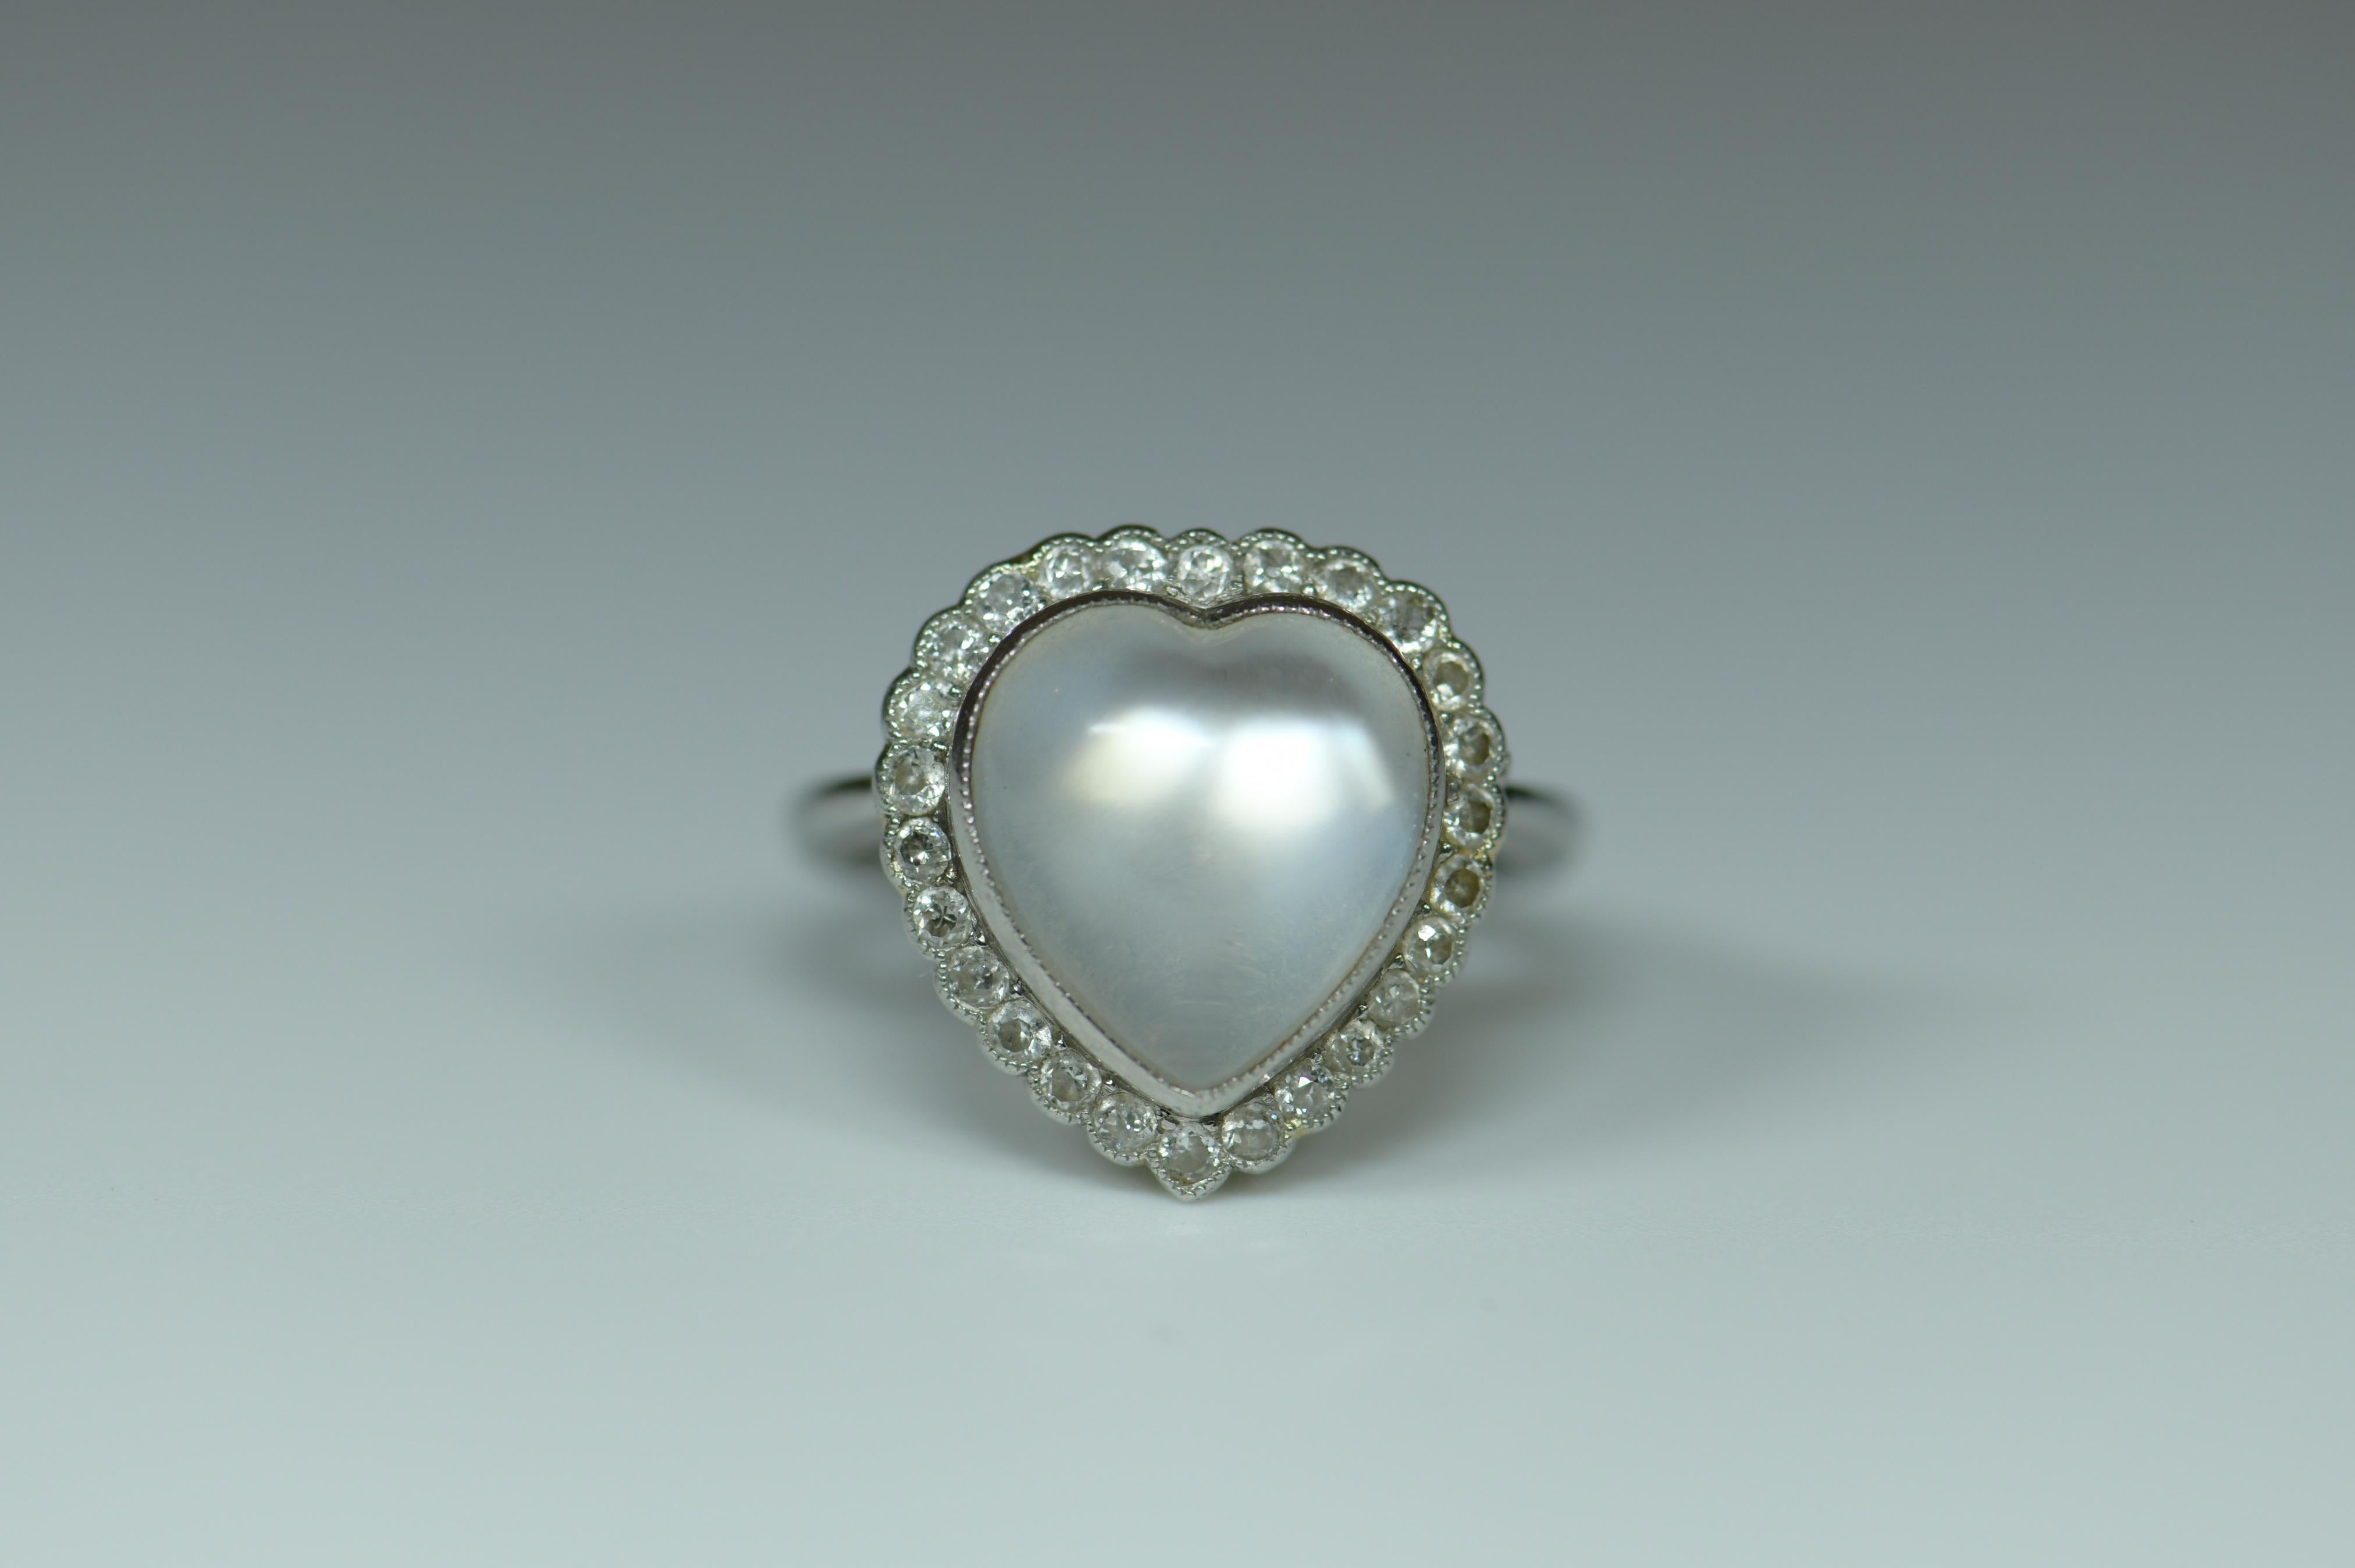 An exquisite moonstone and diamond ring from the early 20th century. This alluring and very unusual piece is made of platinum and features a single moonstone in the center of a diamond-encrusted frame. The moonstone has the hand-carved shape of a